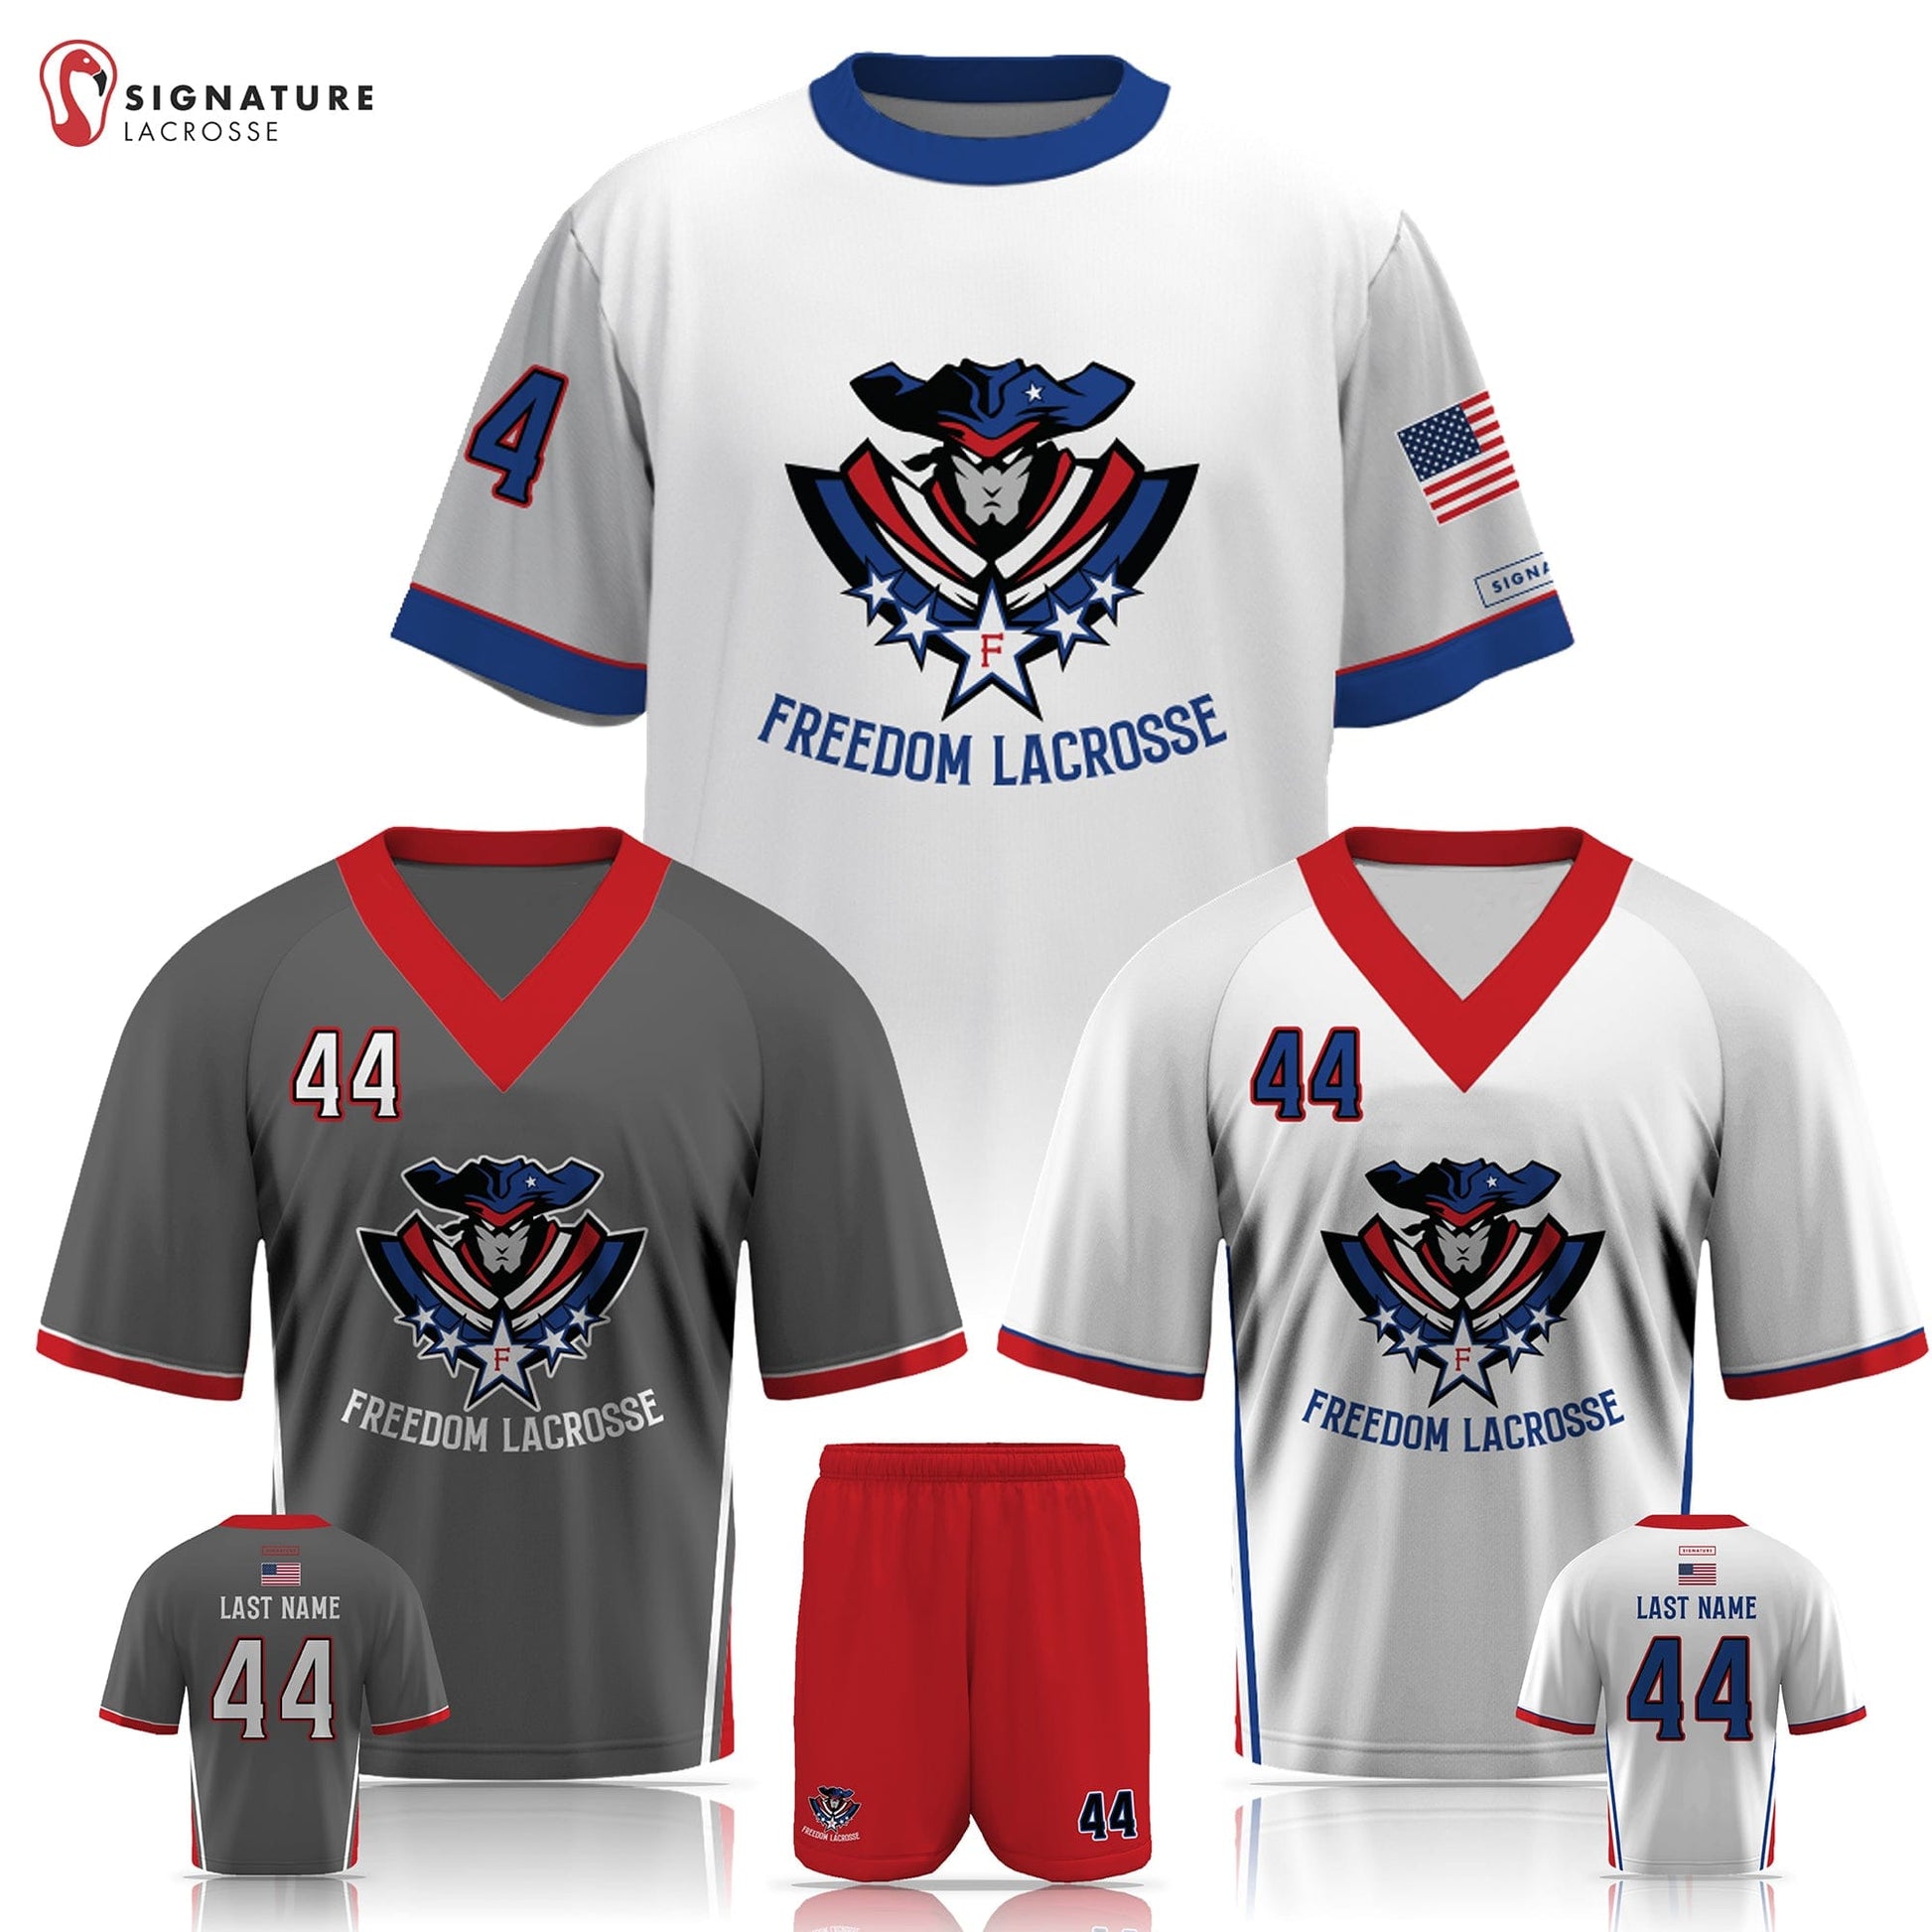 Freedom MS Lacrosse Men's 4 Piece Game Package Signature Lacrosse